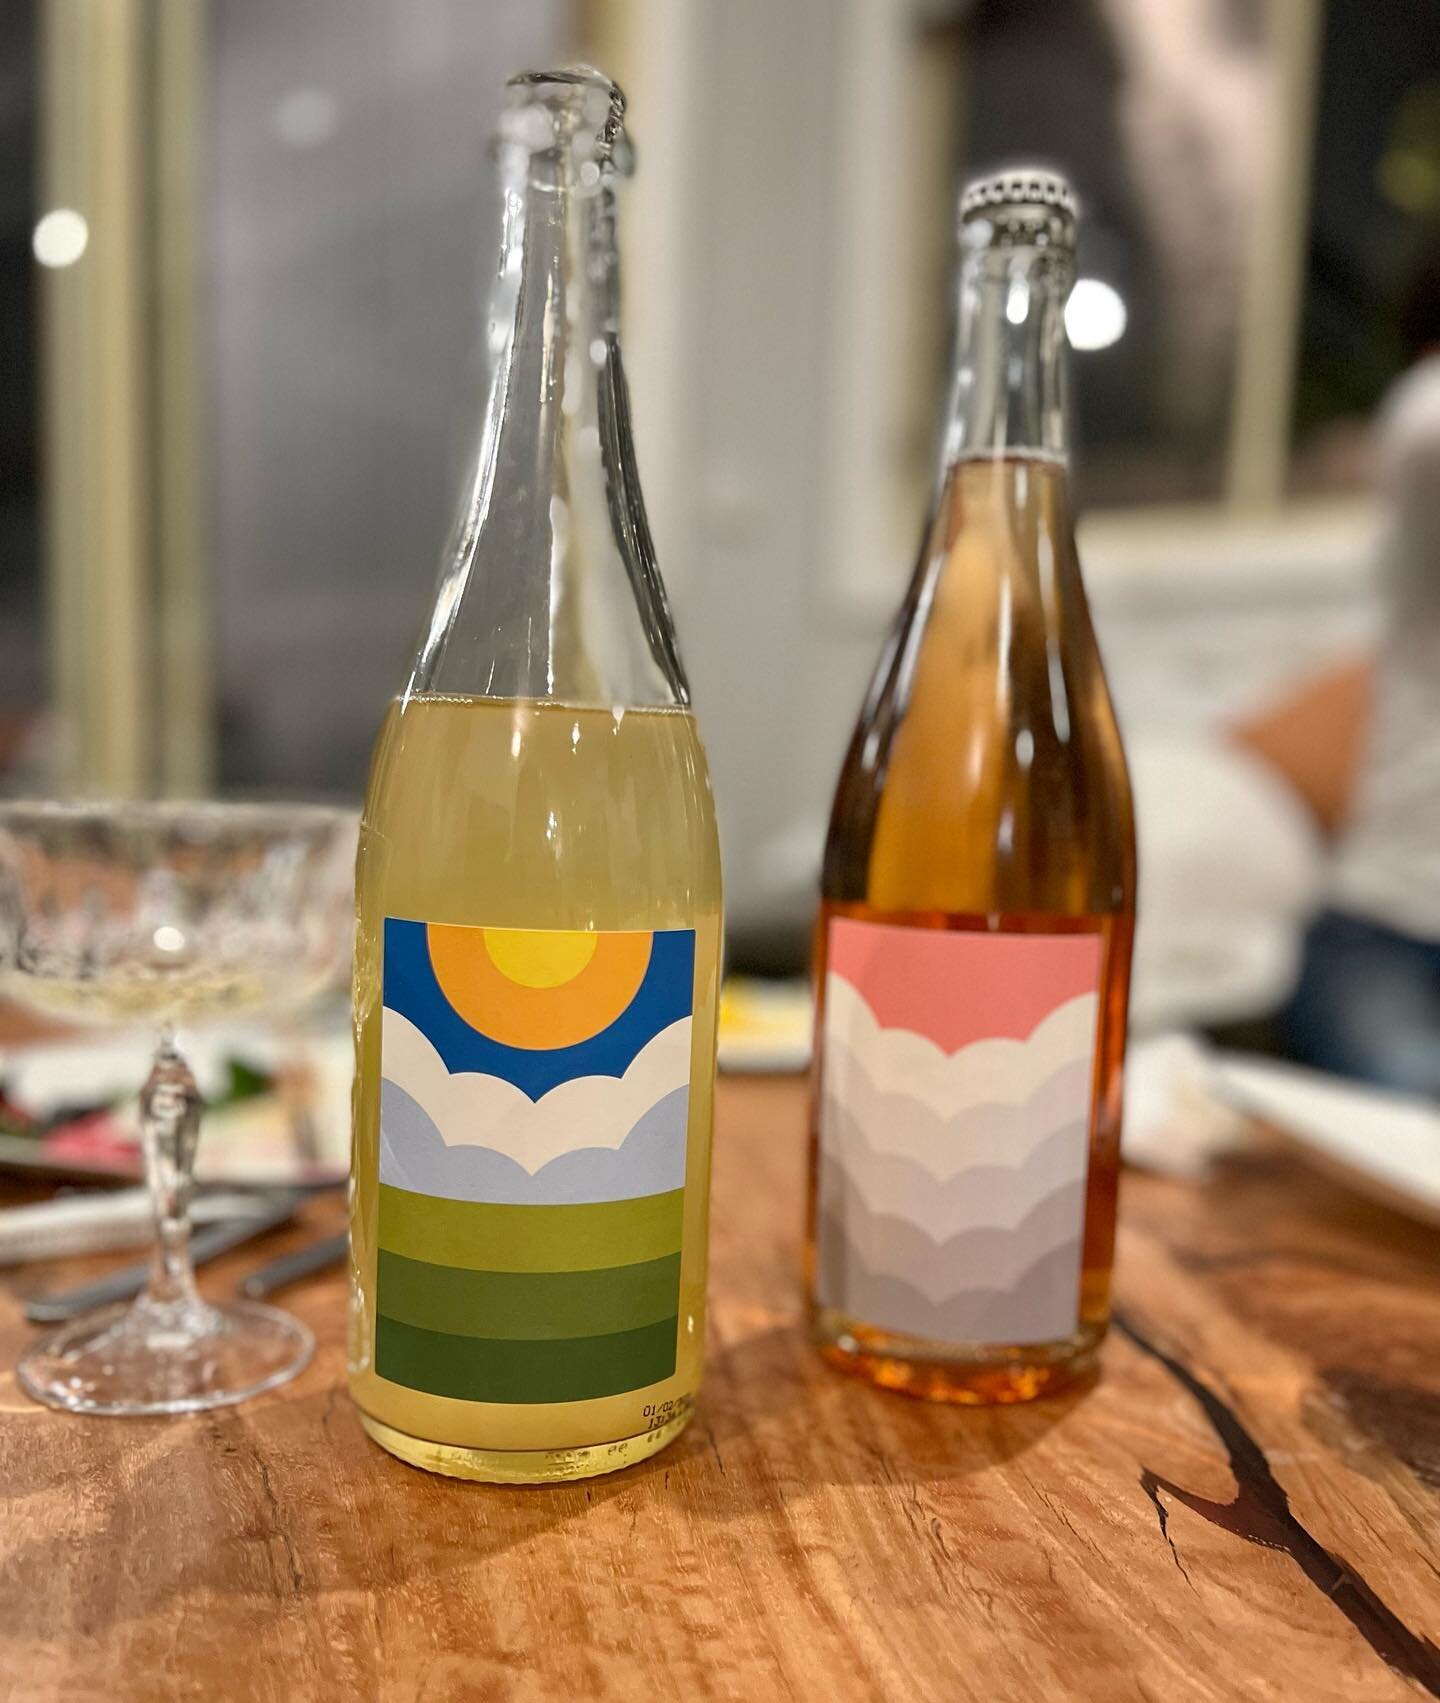 Friday Fizz, what&rsquo;s not too love 🥂

Pet Nat and Pink Prosecco perfect for any occasion.

#rangelifewine #friyay #fridayfizz #petnat #pinkprosecco #sparkling #wine #winetime #winelover #fridaydrinks